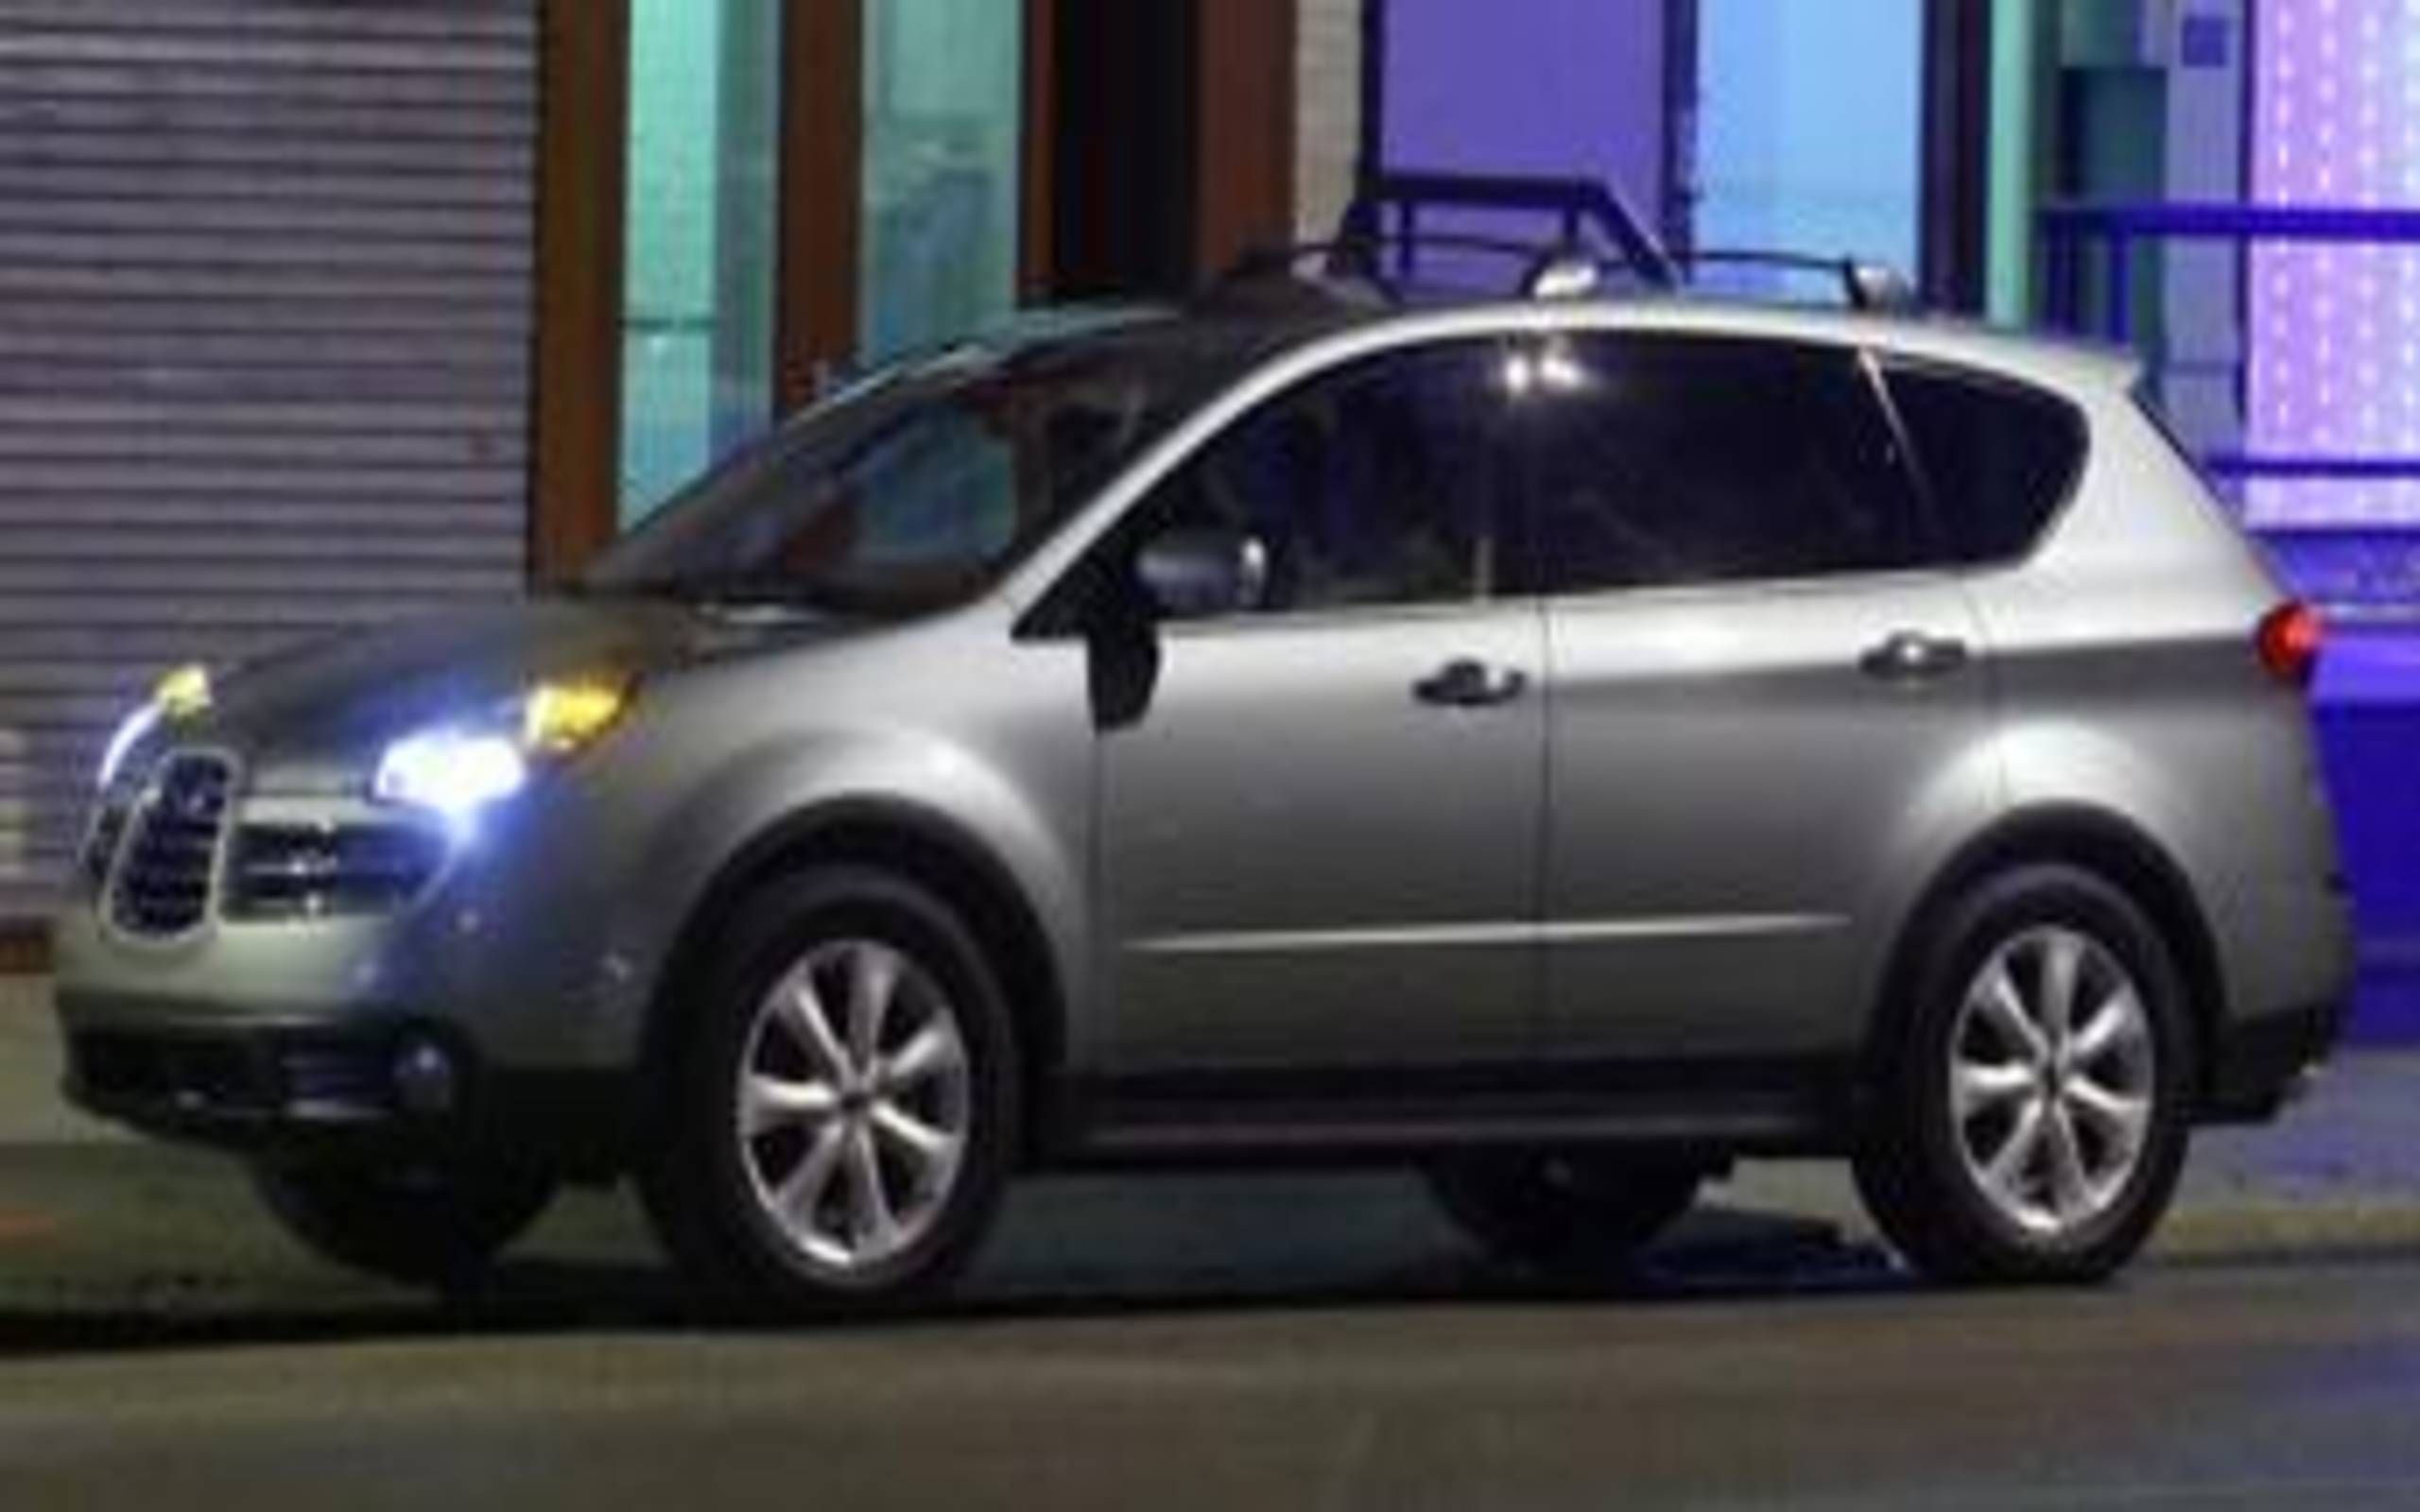 2006 Subaru B9 Tribeca: Stop the Grille-ing! Otherwise, Tribeca is Okay